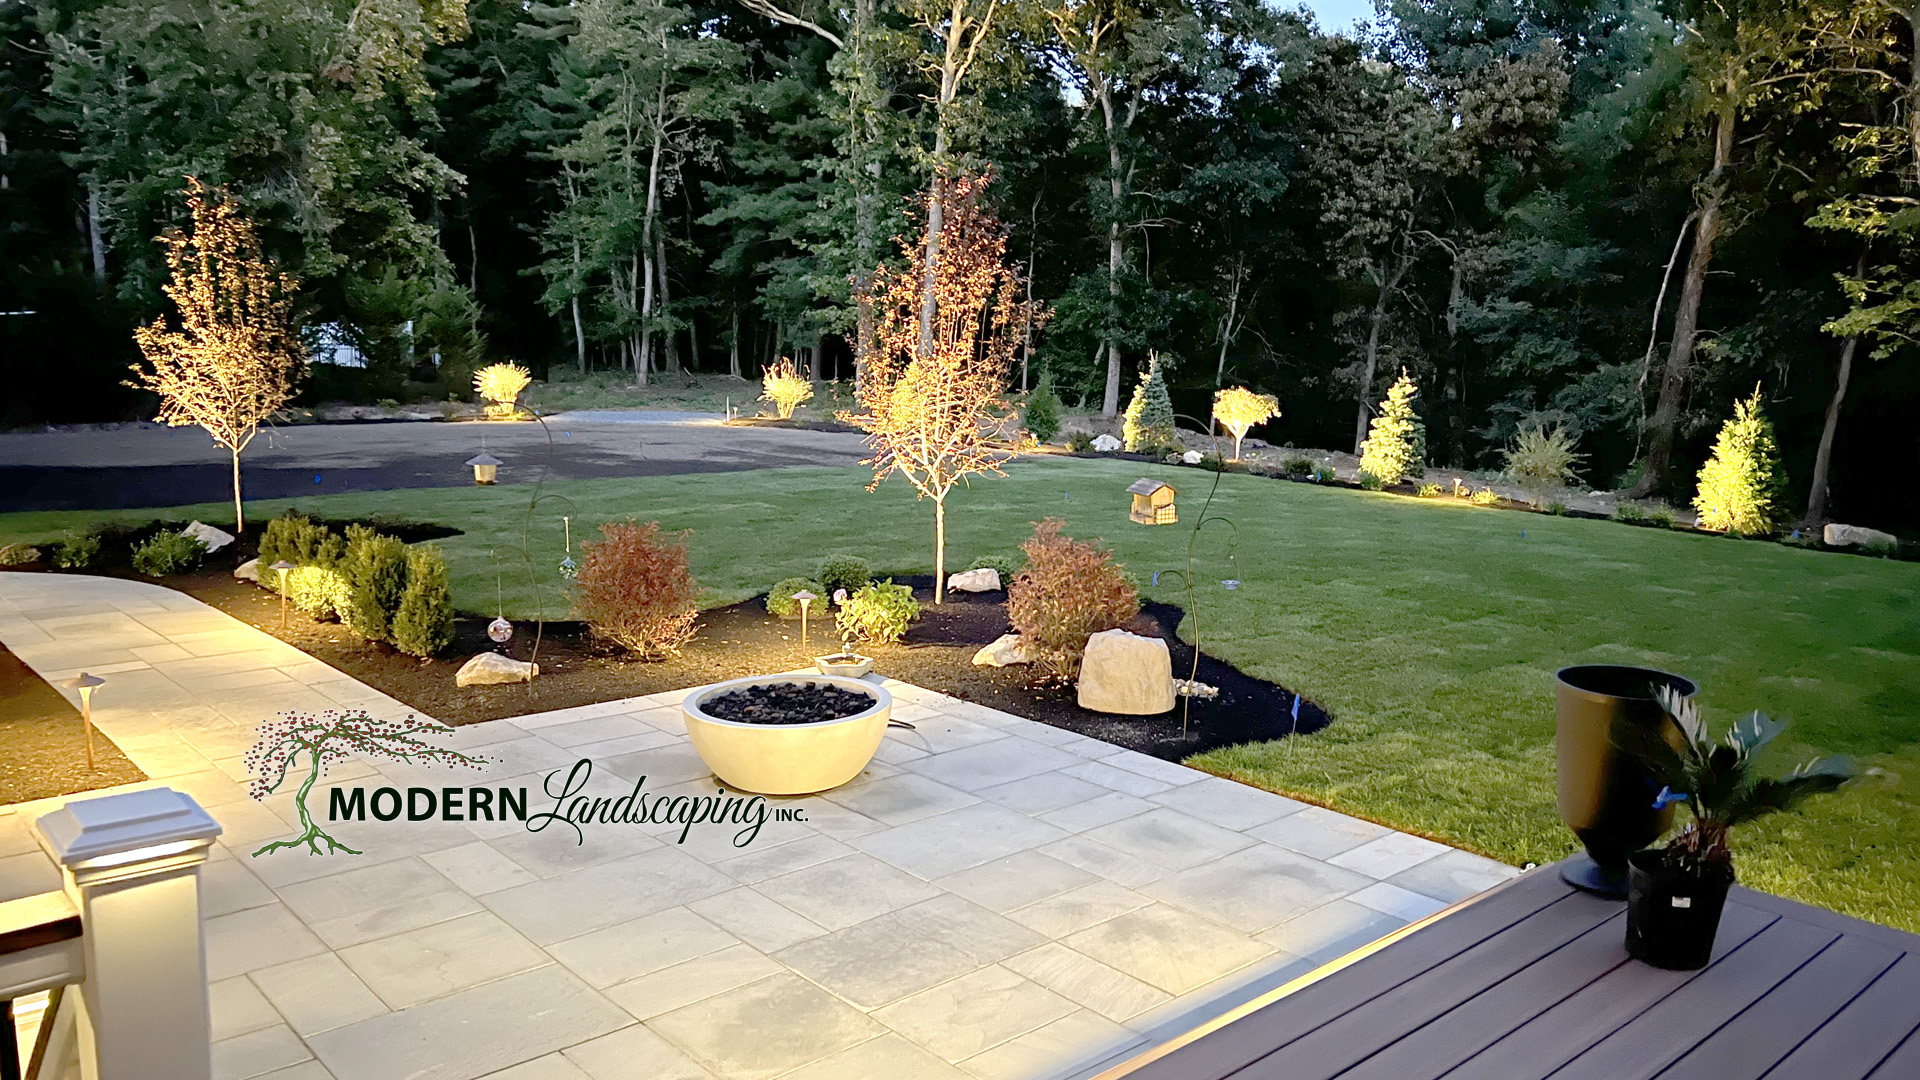 Landscaping Easton, Pool contractors, Modern Landscaping Inc